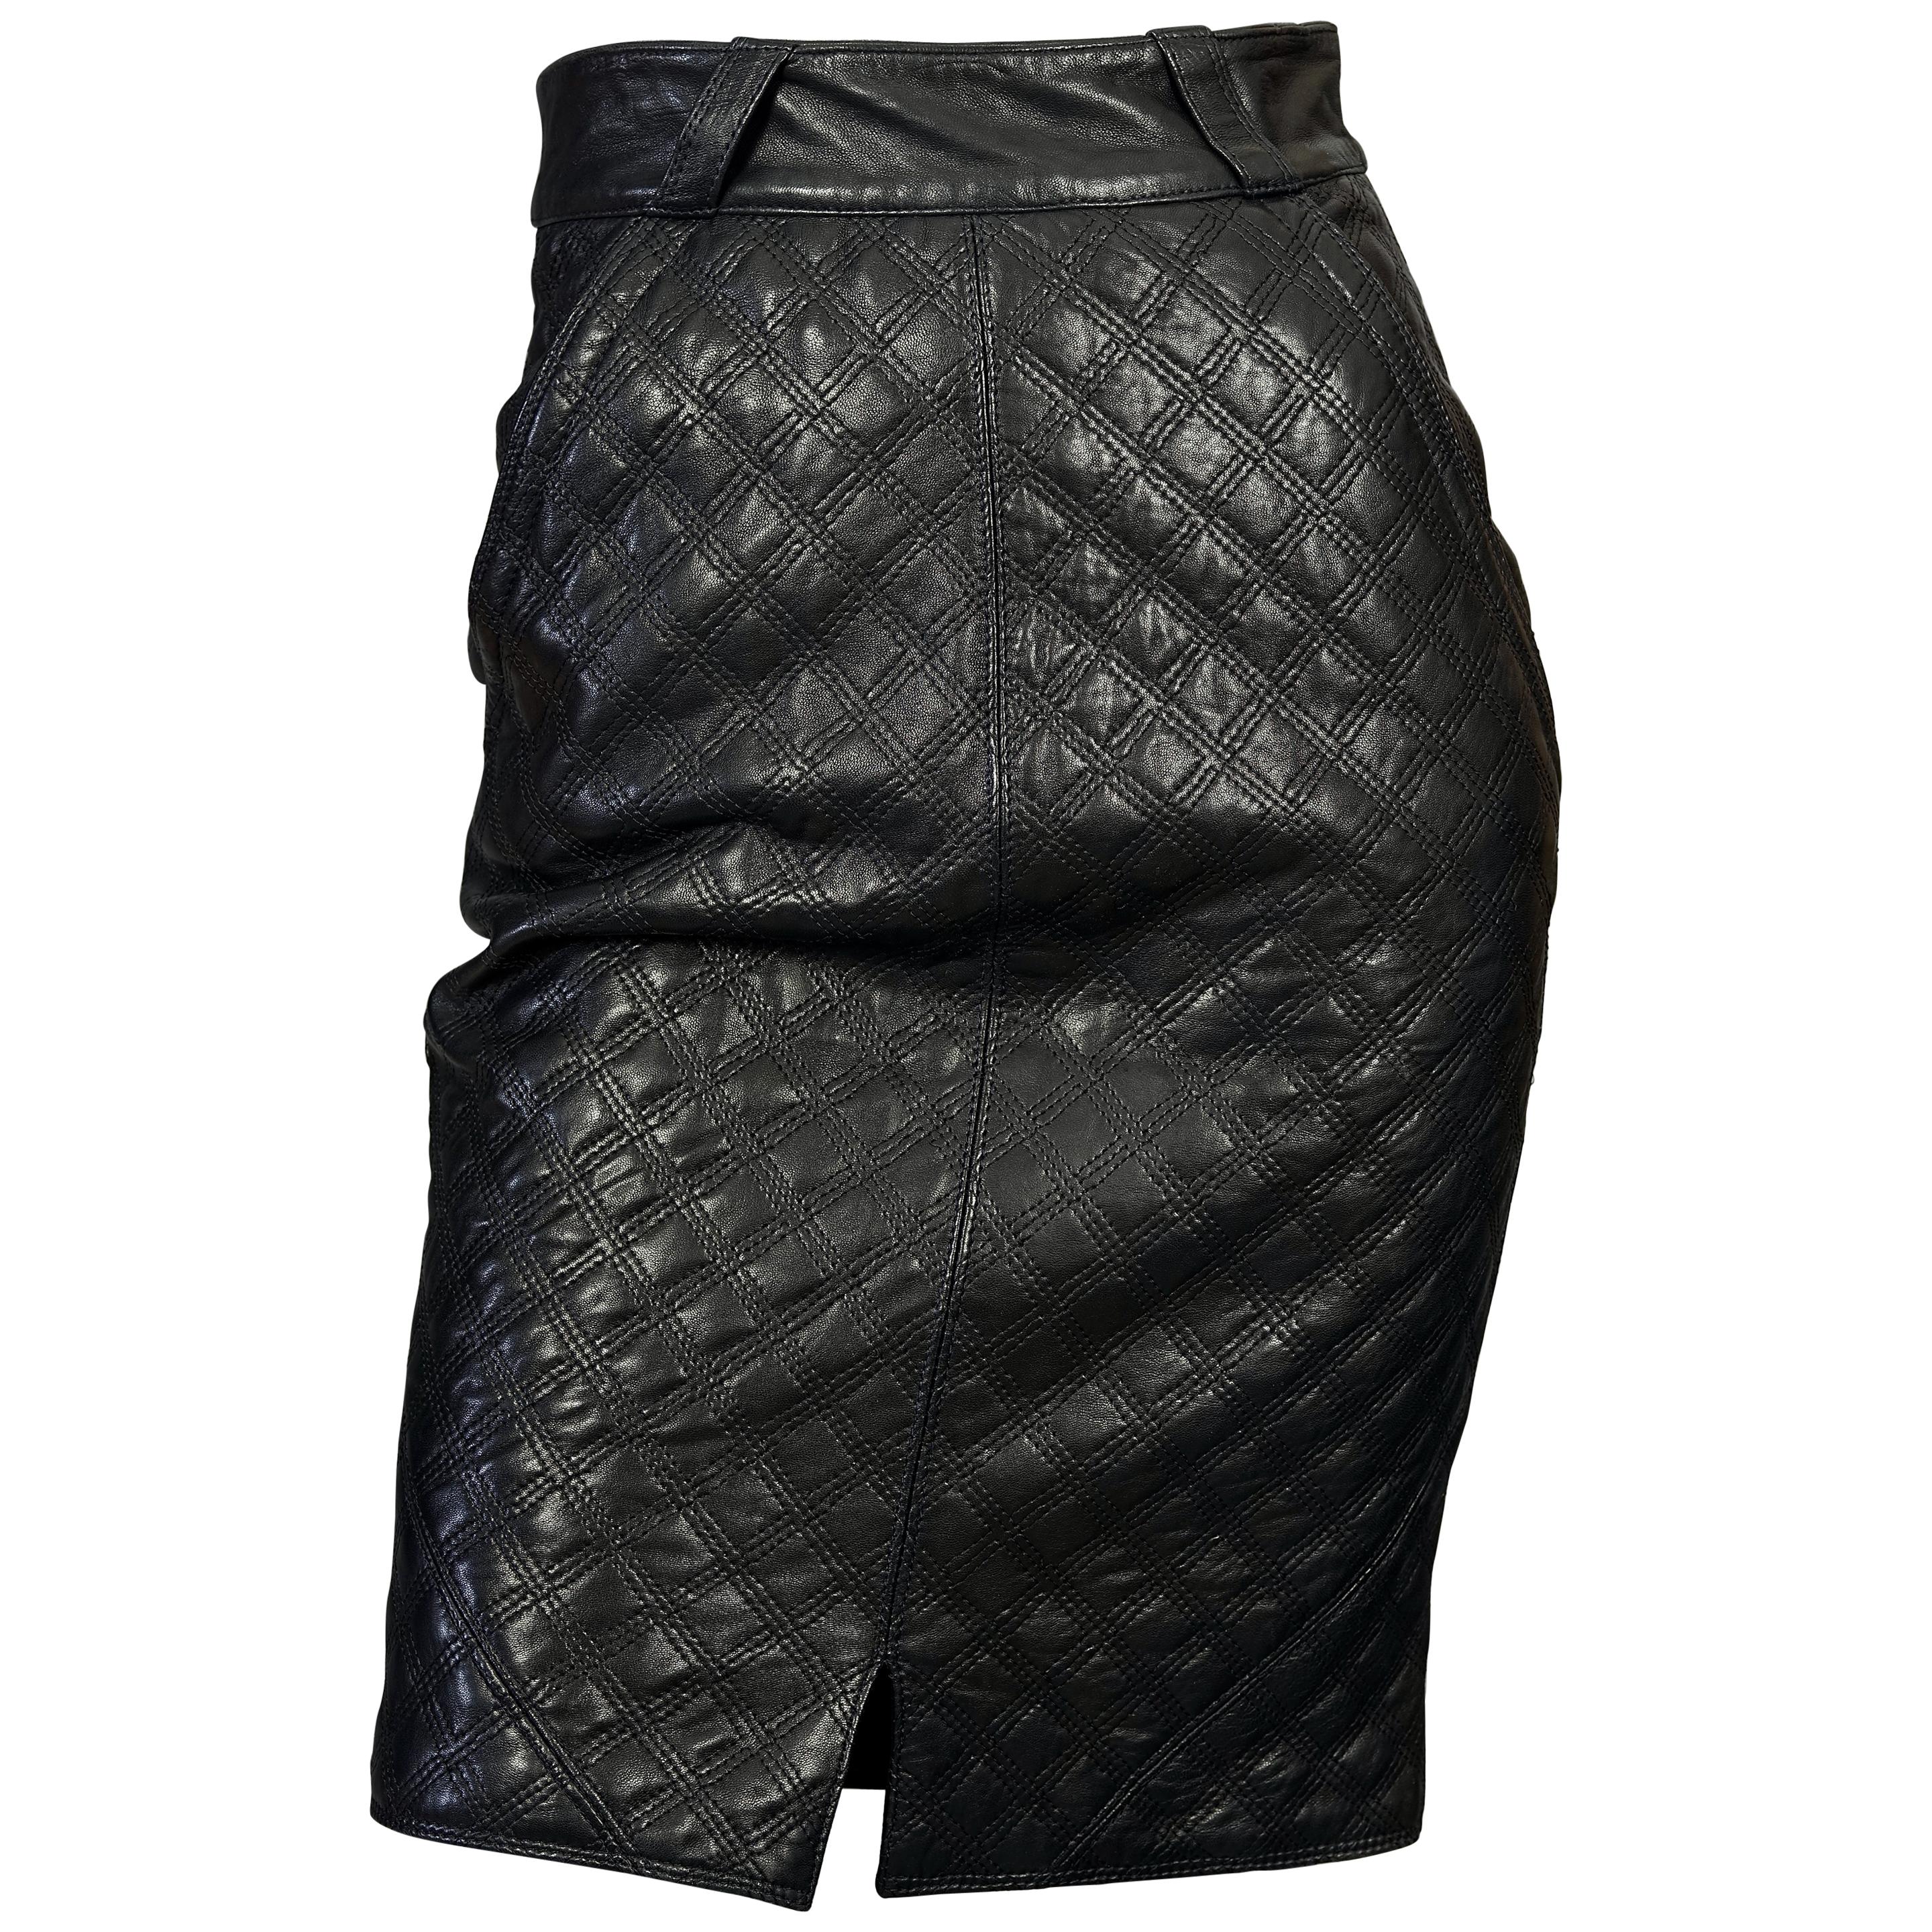 Vintage 1990s GIANNI VERSACE Black Quilted Leather Skirt